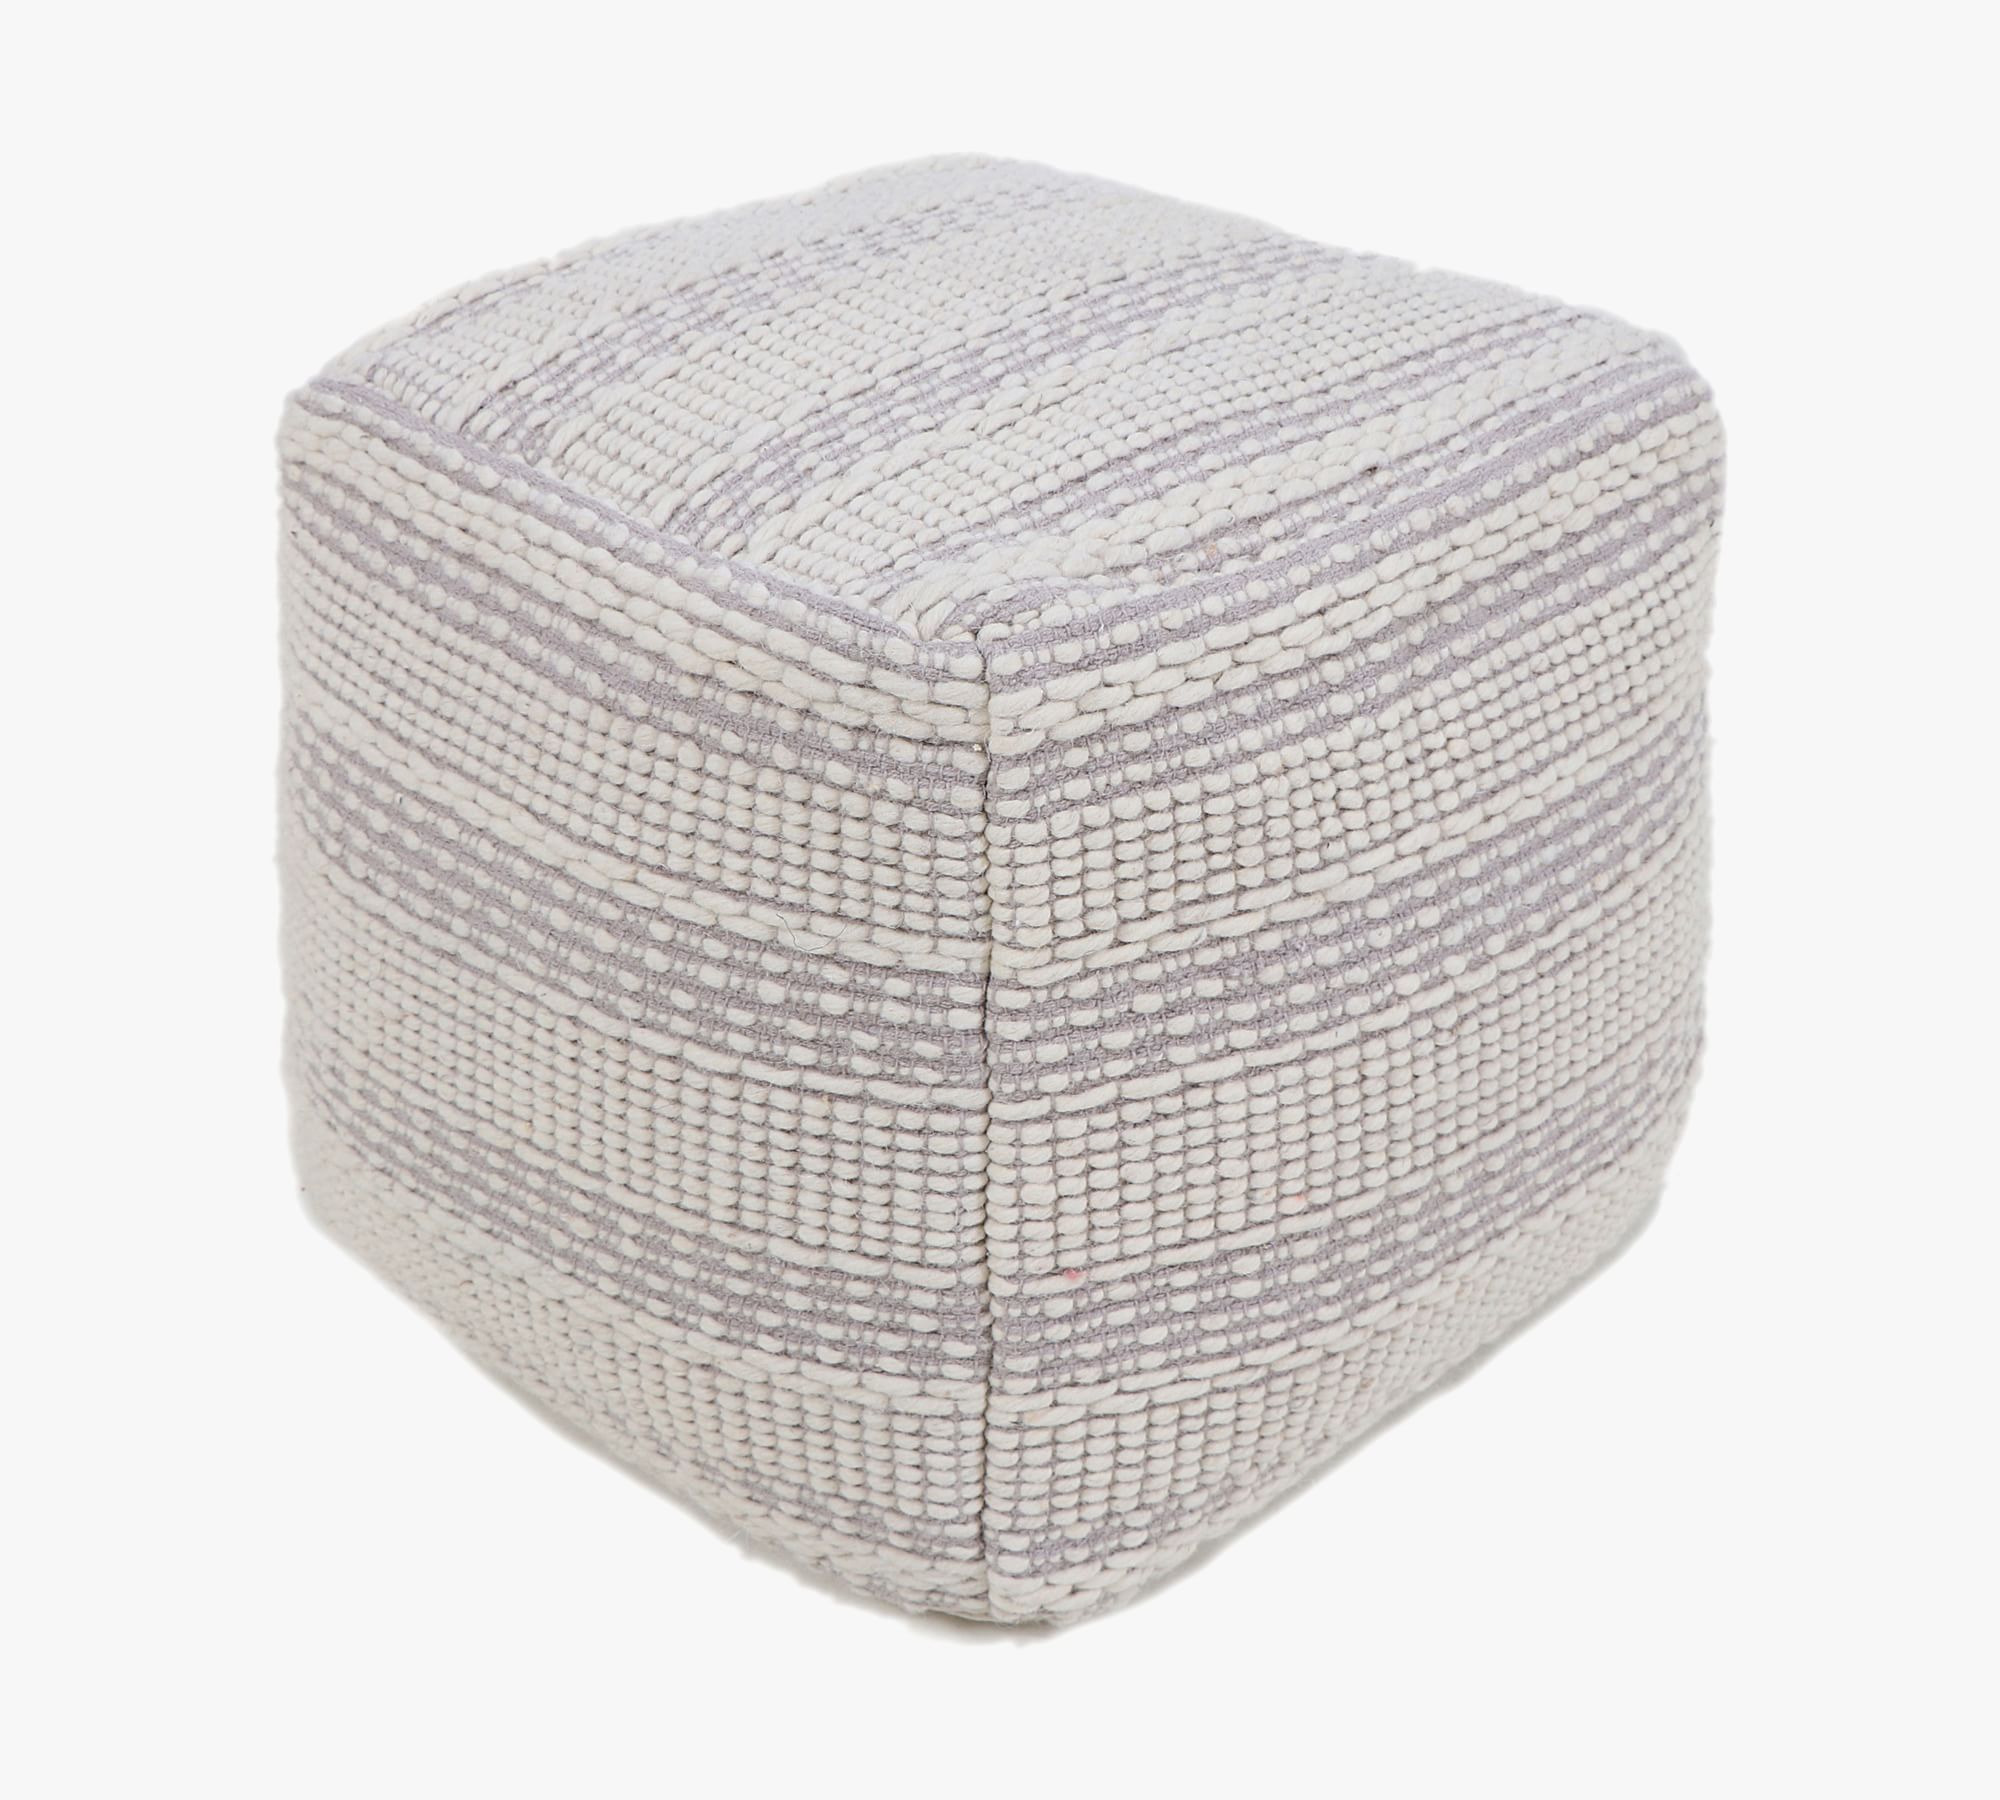 Glace Handwoven Wool Pouf